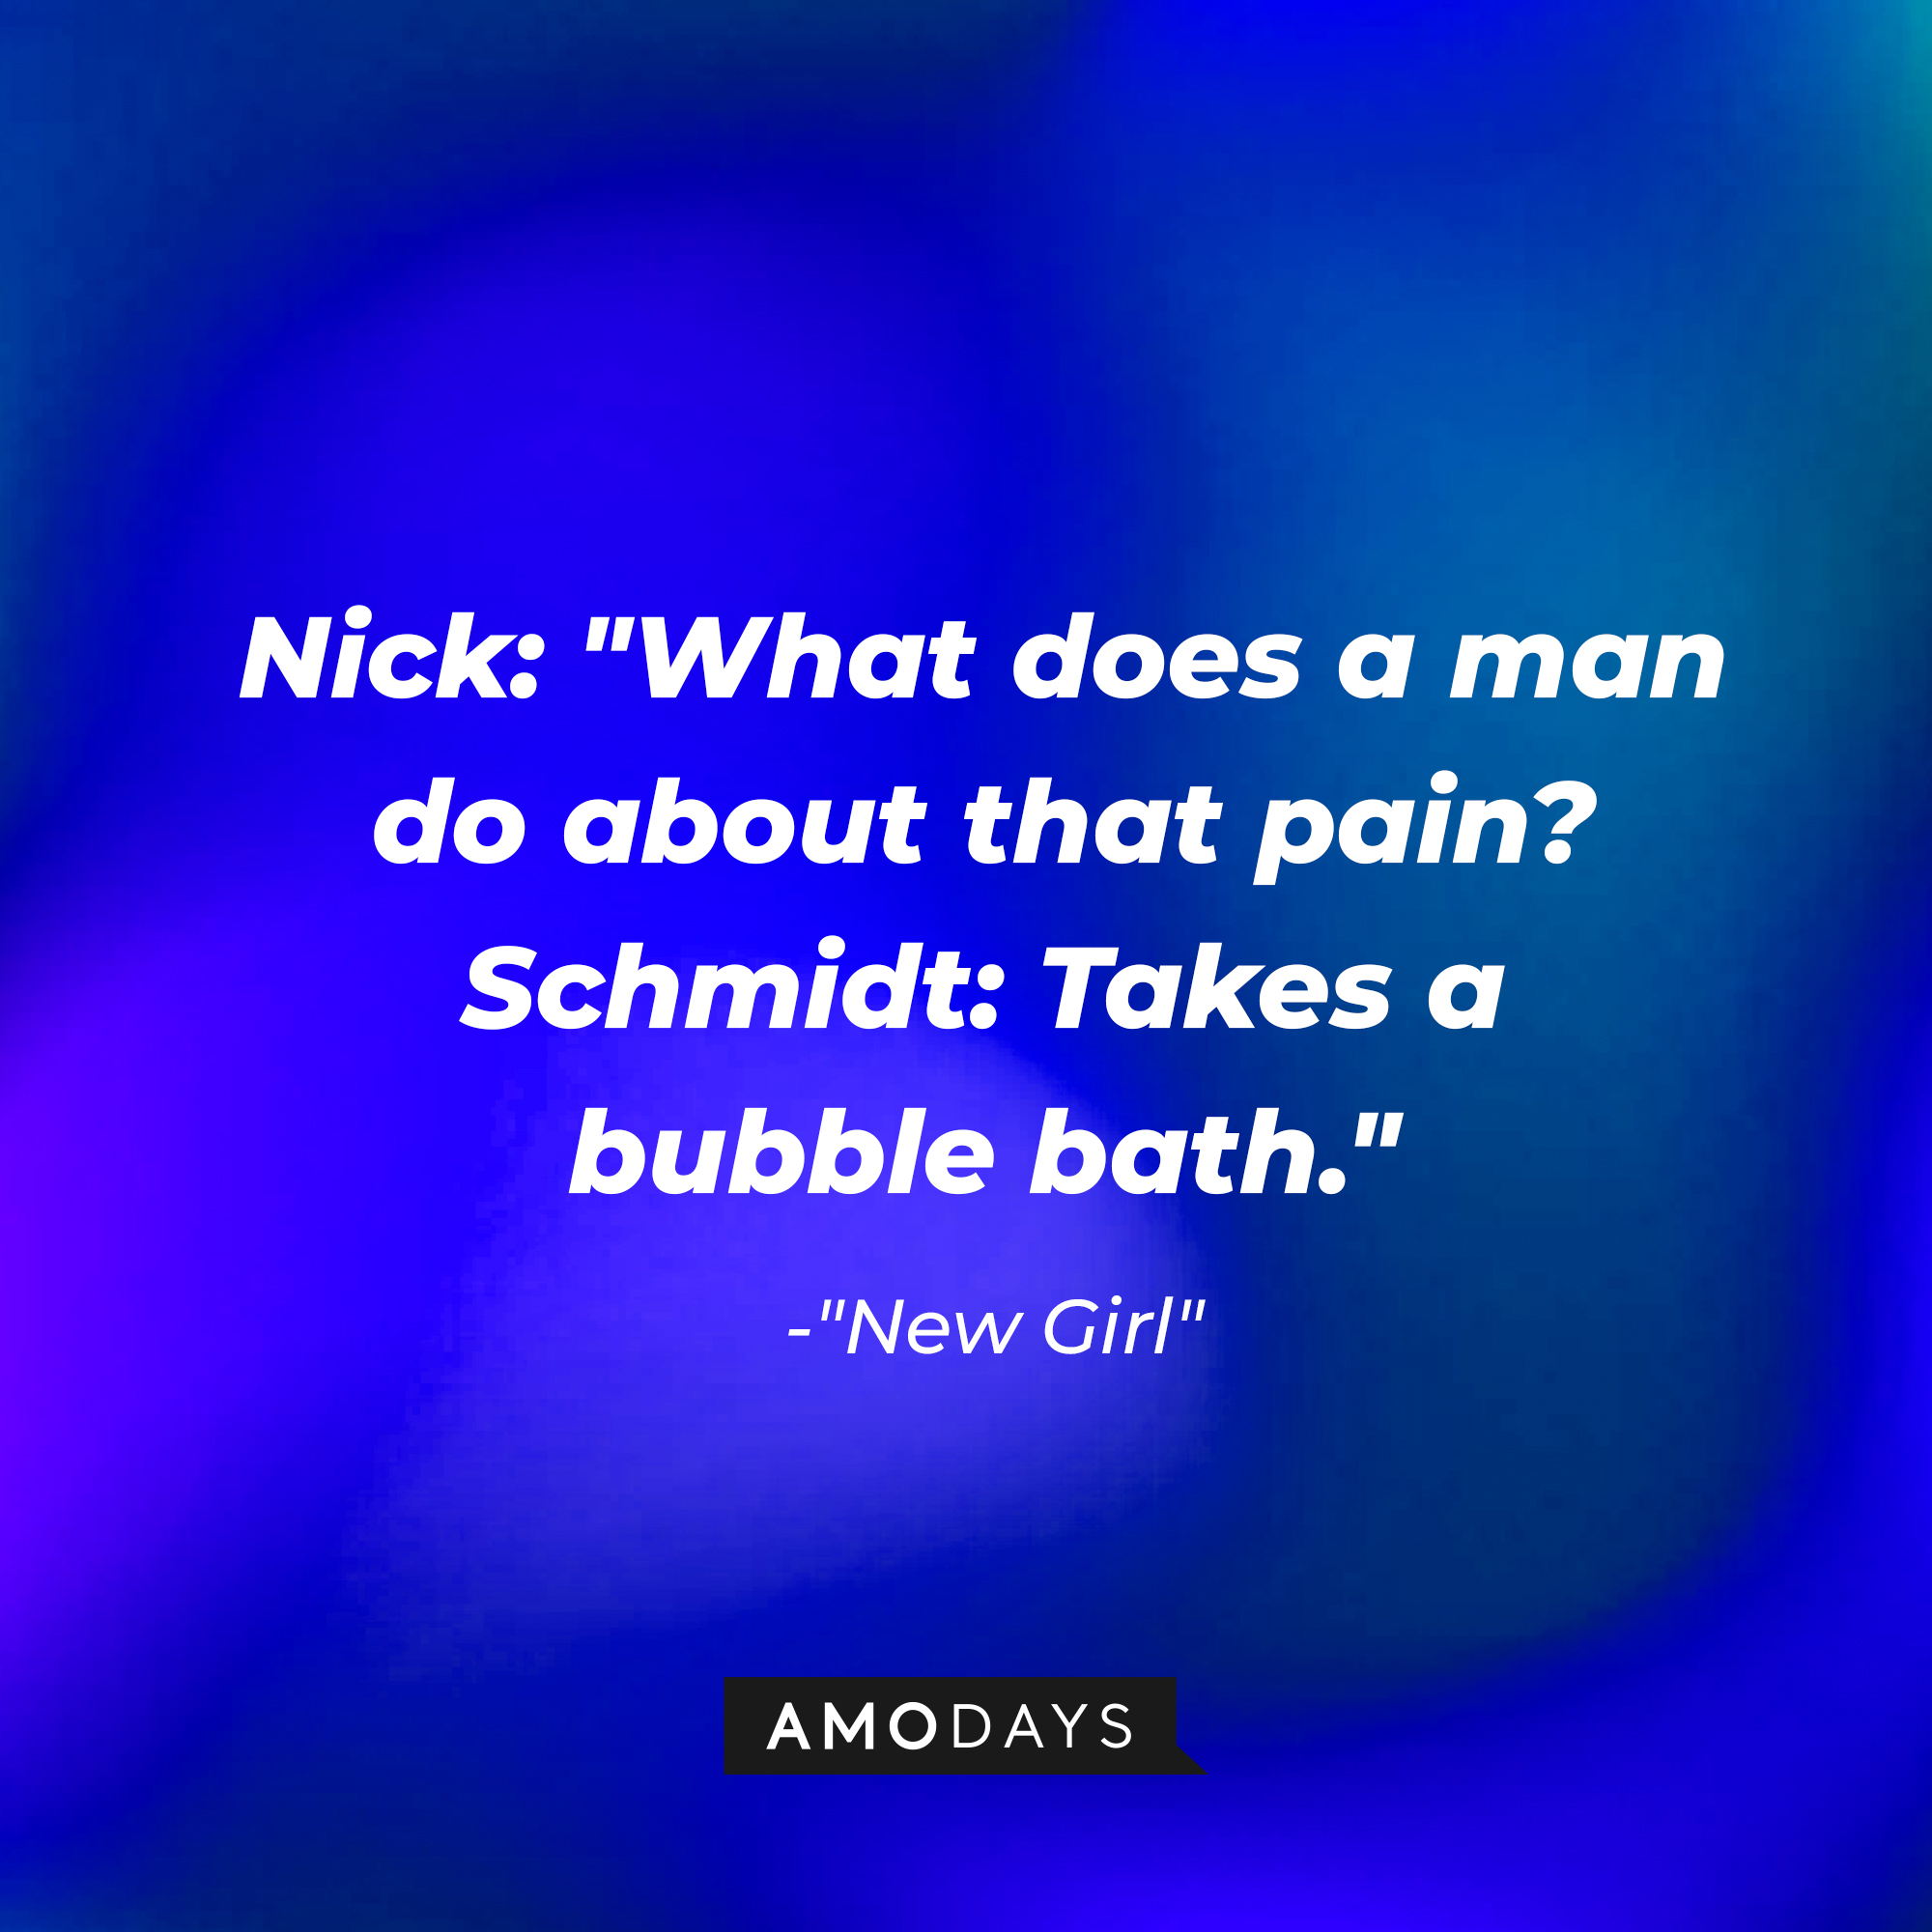 "New Girl" quote, "Nick: What does a man do about that pain? Schmidt: Takes a bubble bath." | Source: Amodays